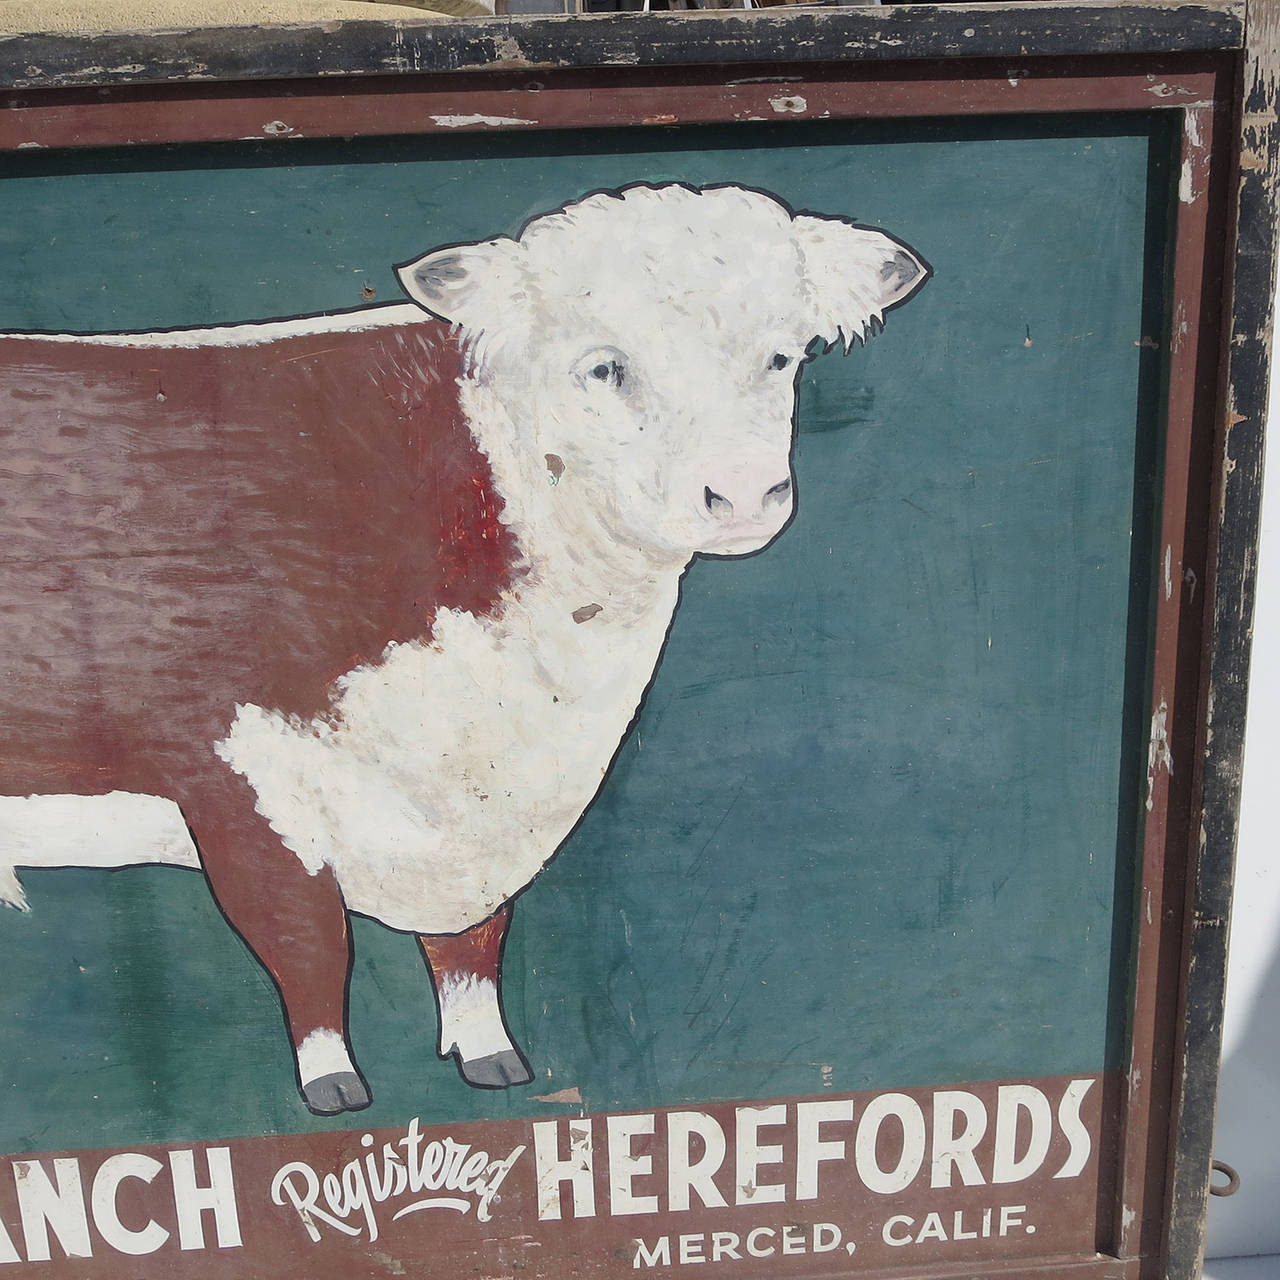 Charm abounds in this great Hereford sign, painted for the Helm Ranch of Merced, California. The sign is double-sided, painted on both sides. The 